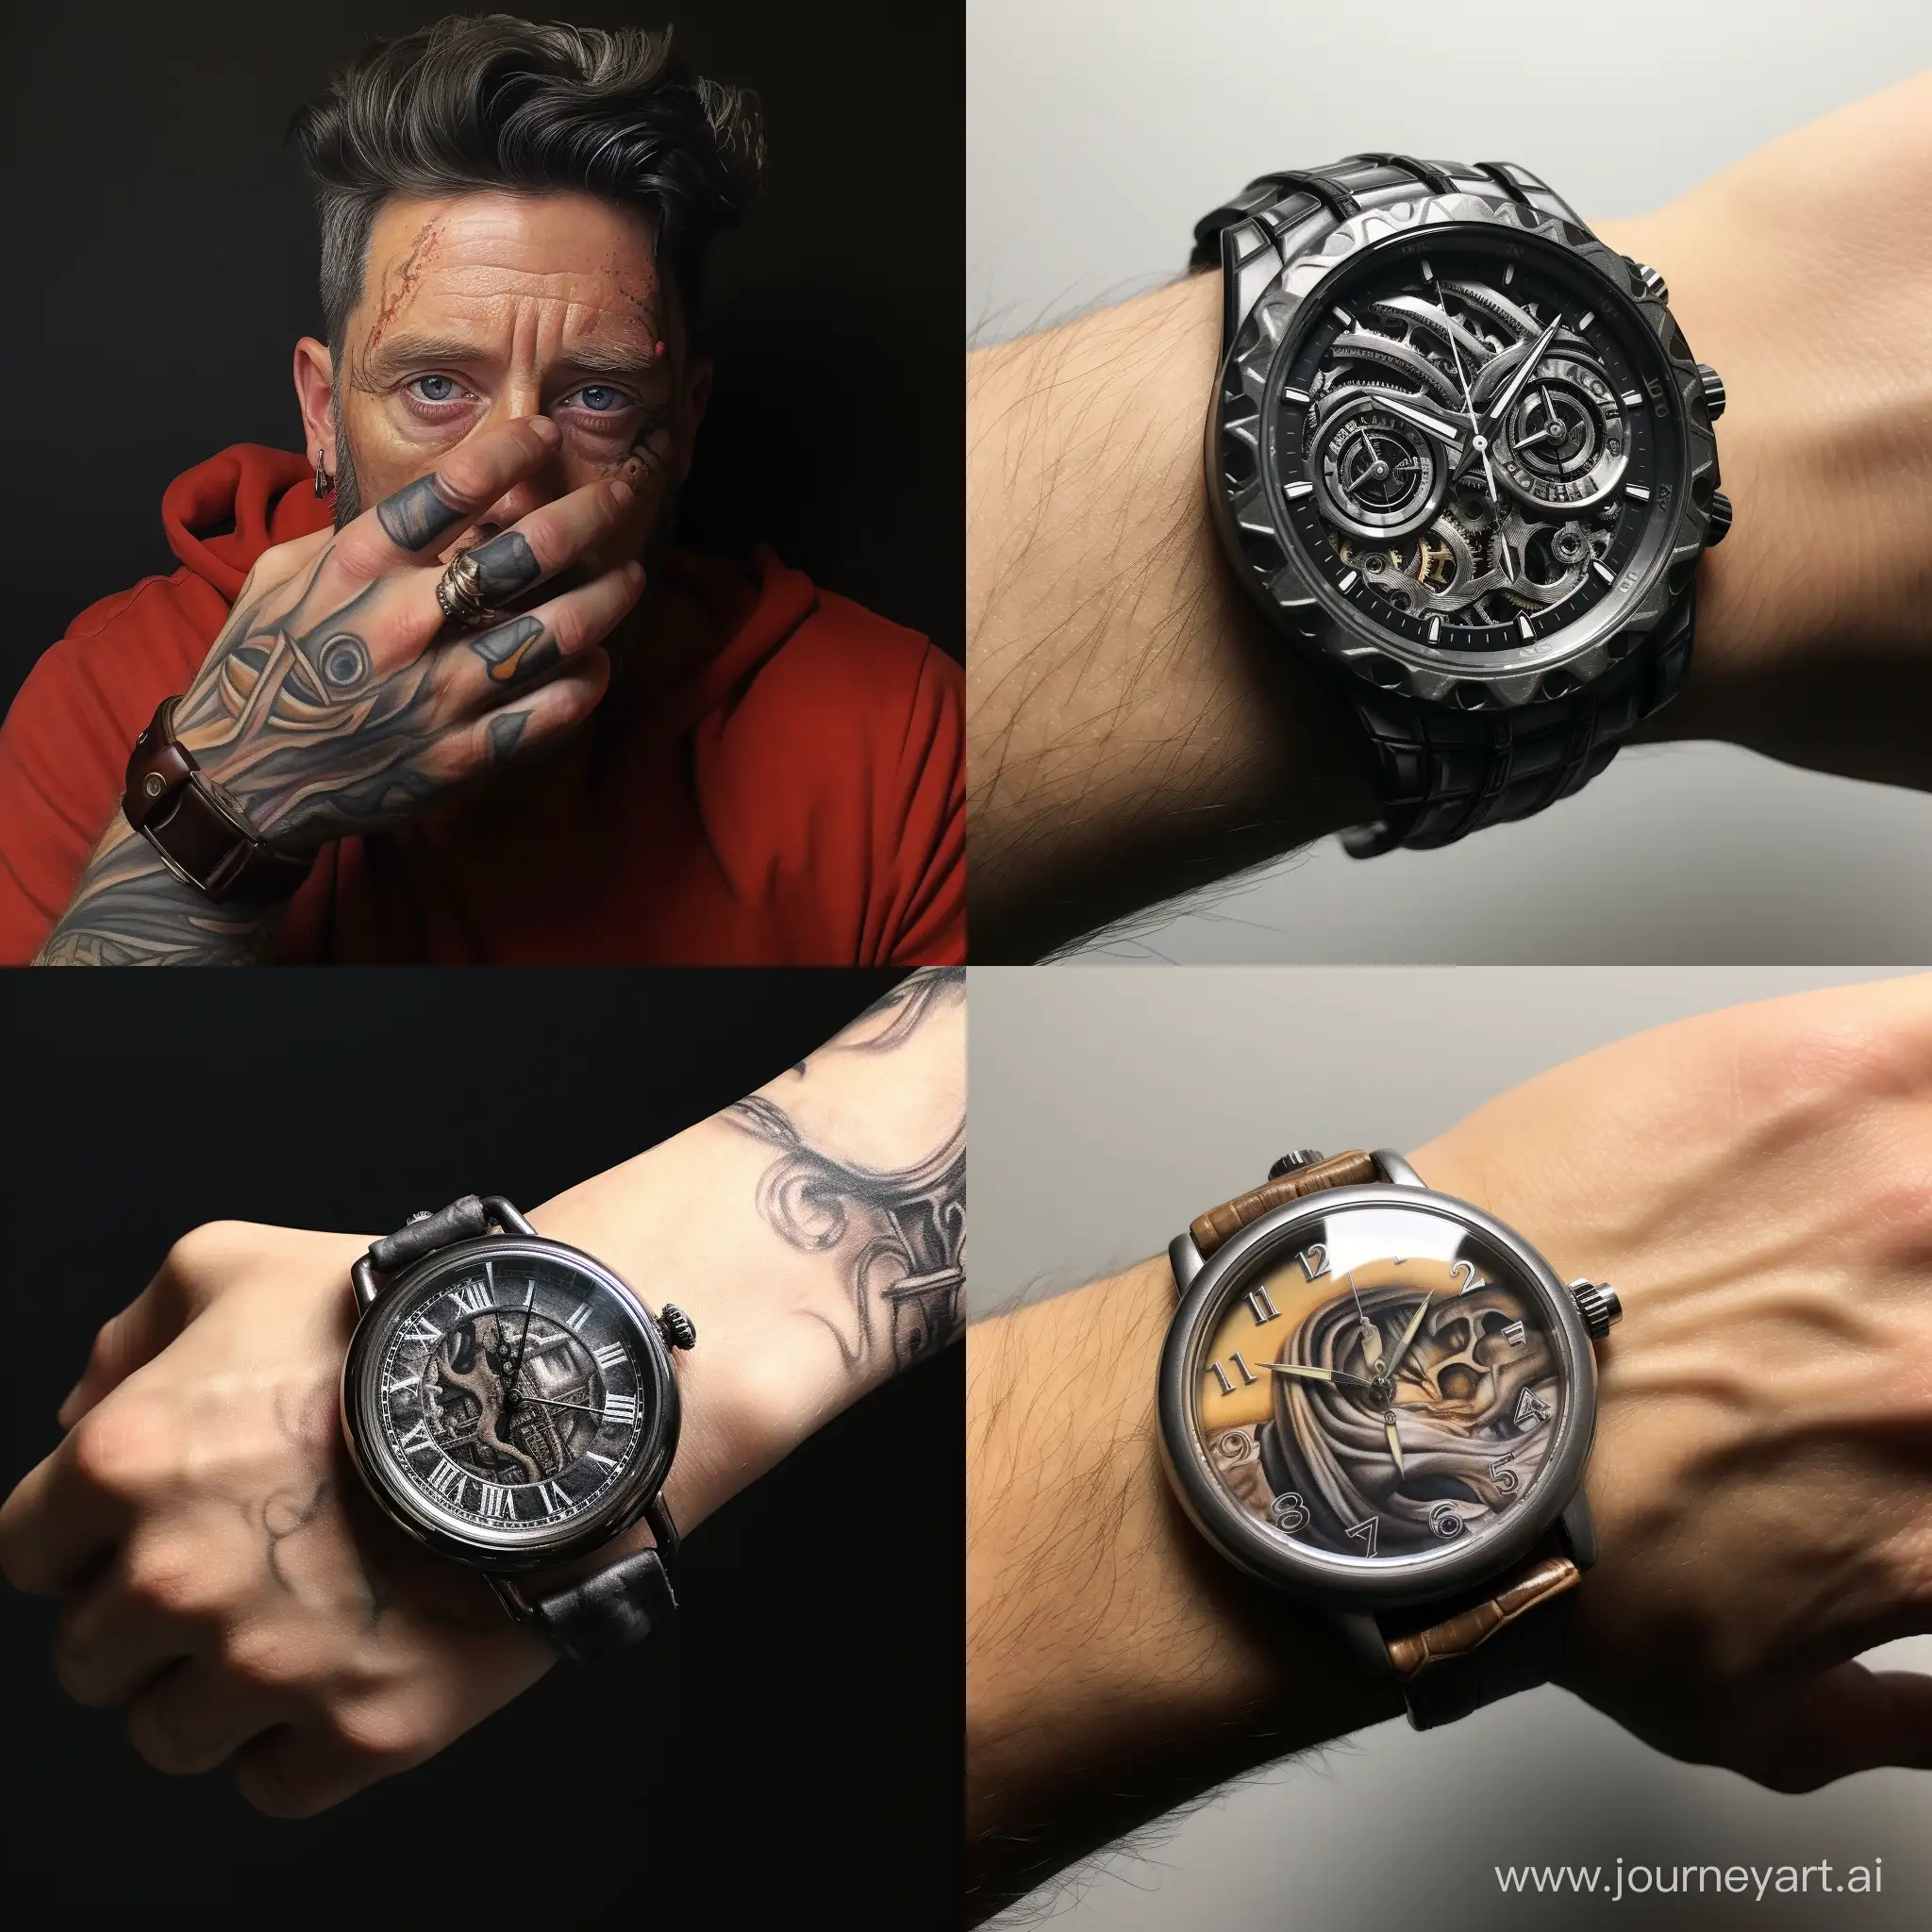 Hyperrealism-Watches-on-Mans-Hand-11-AR-No-49176